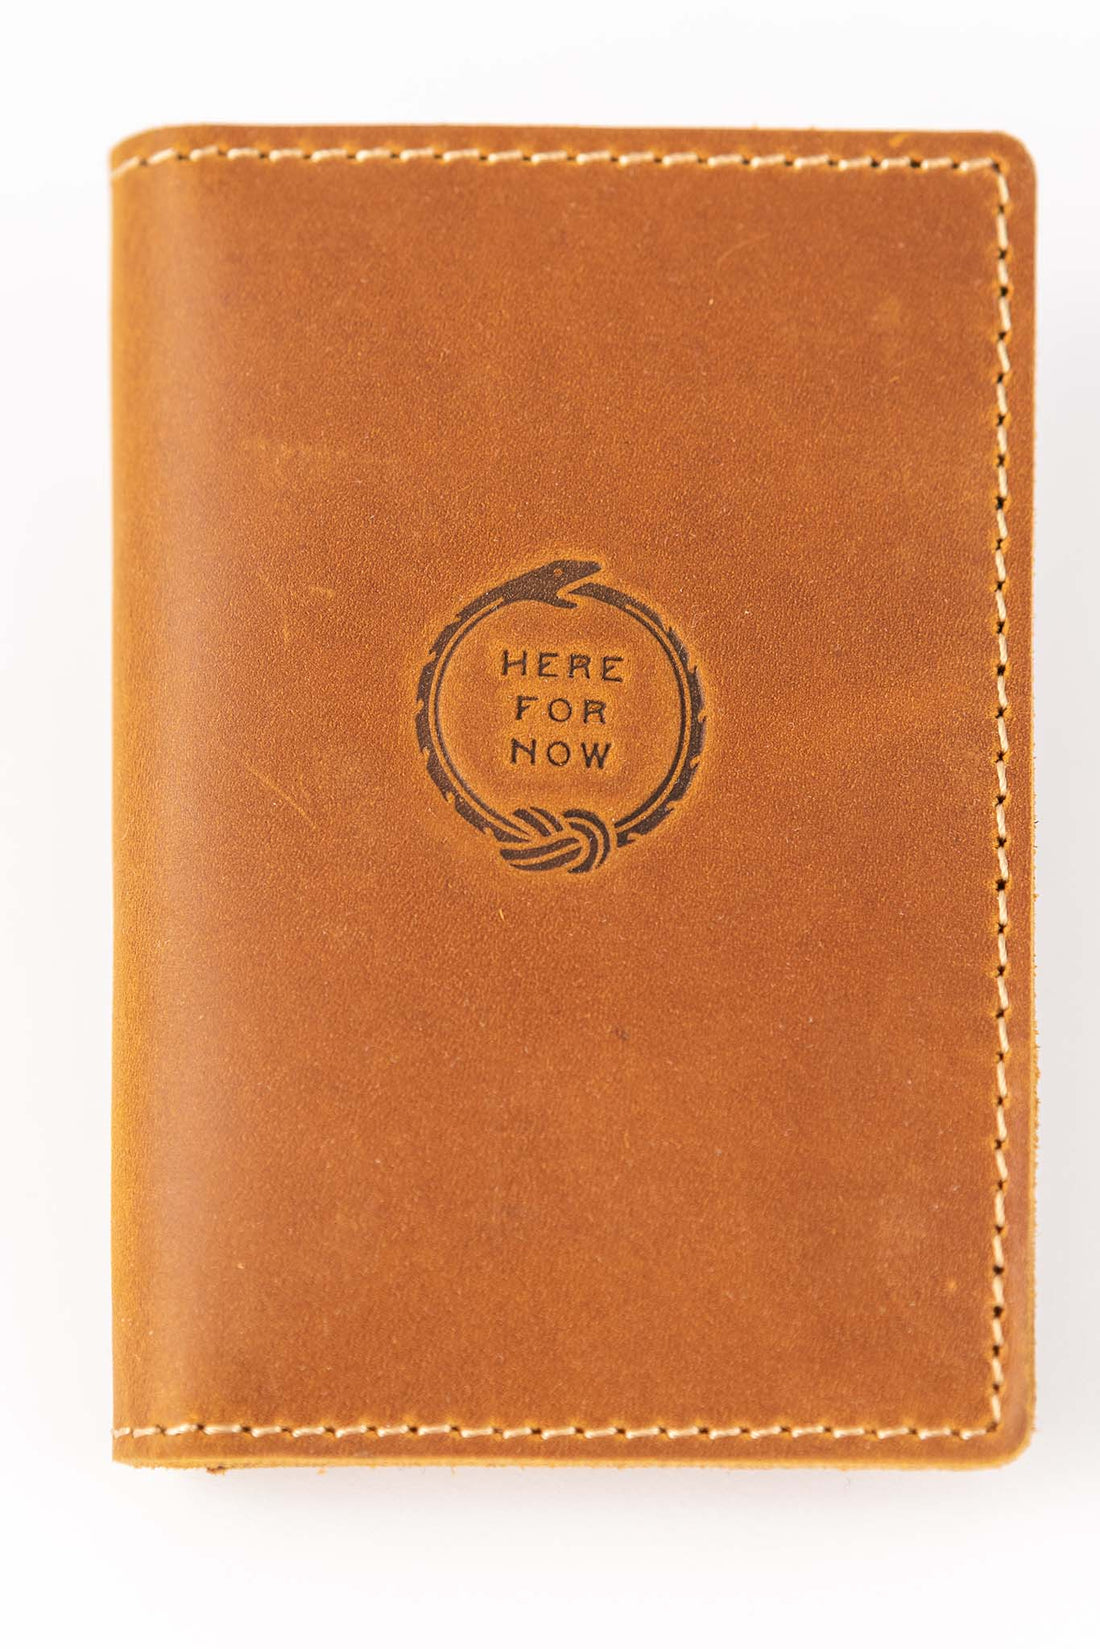 Front and closed view of slim bifold tan colored leather wallet with visible stitching and stamped Ouroboros design with text "Here For Now"